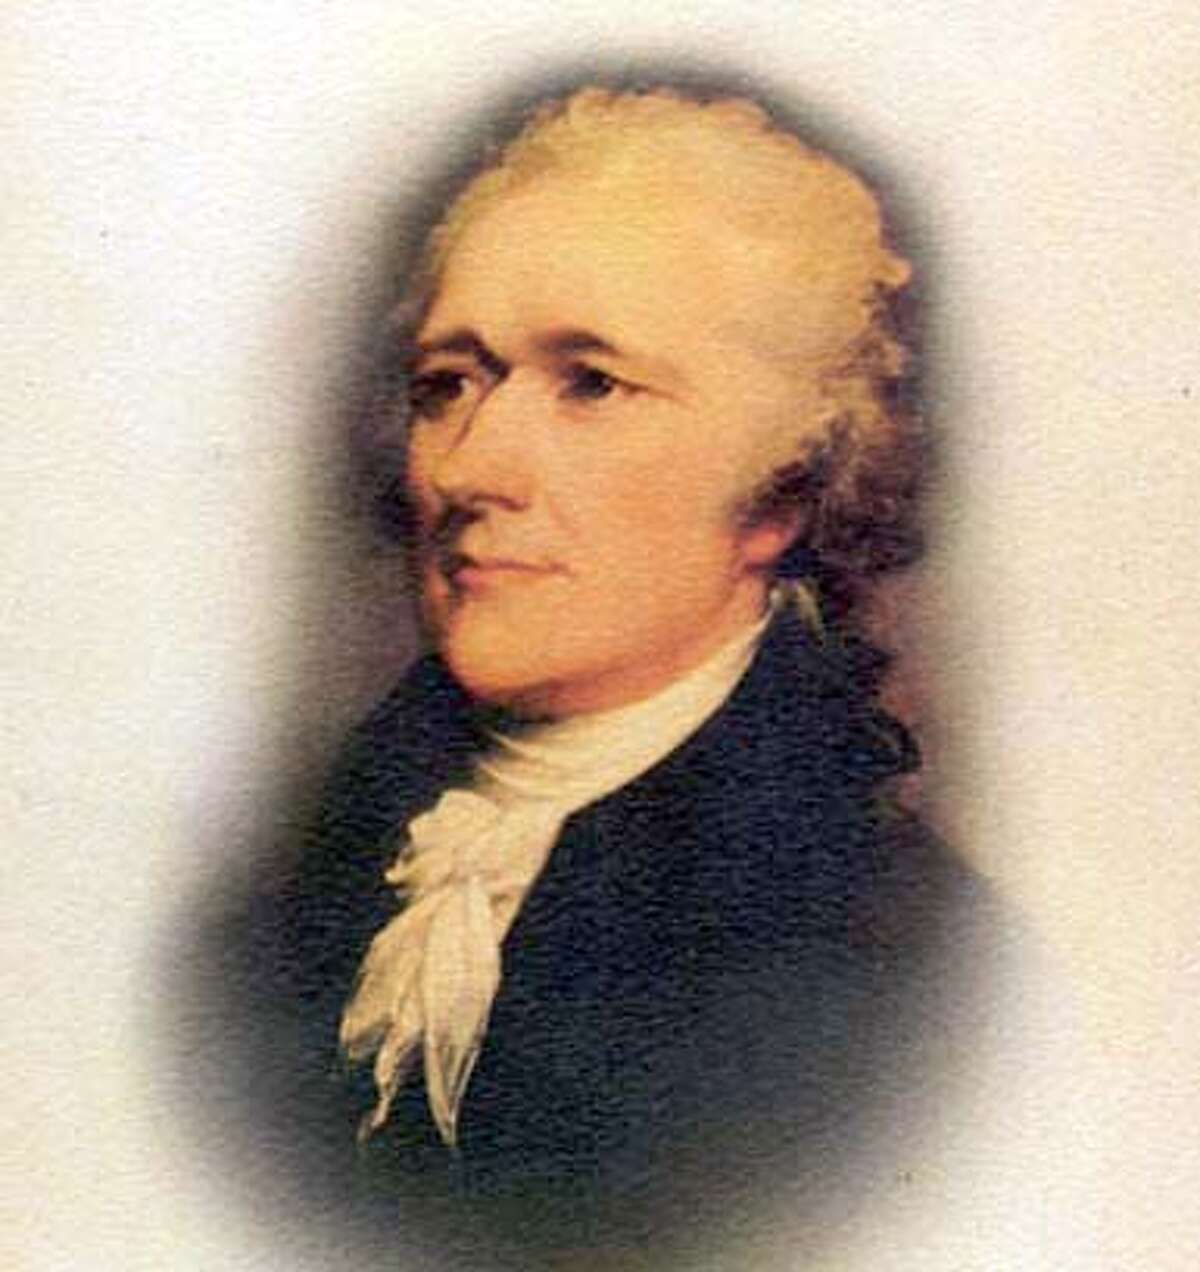 Image from book jacket of "Alexander Hamilton" by Ron Chernow (Penguin Press) to be used with book review only